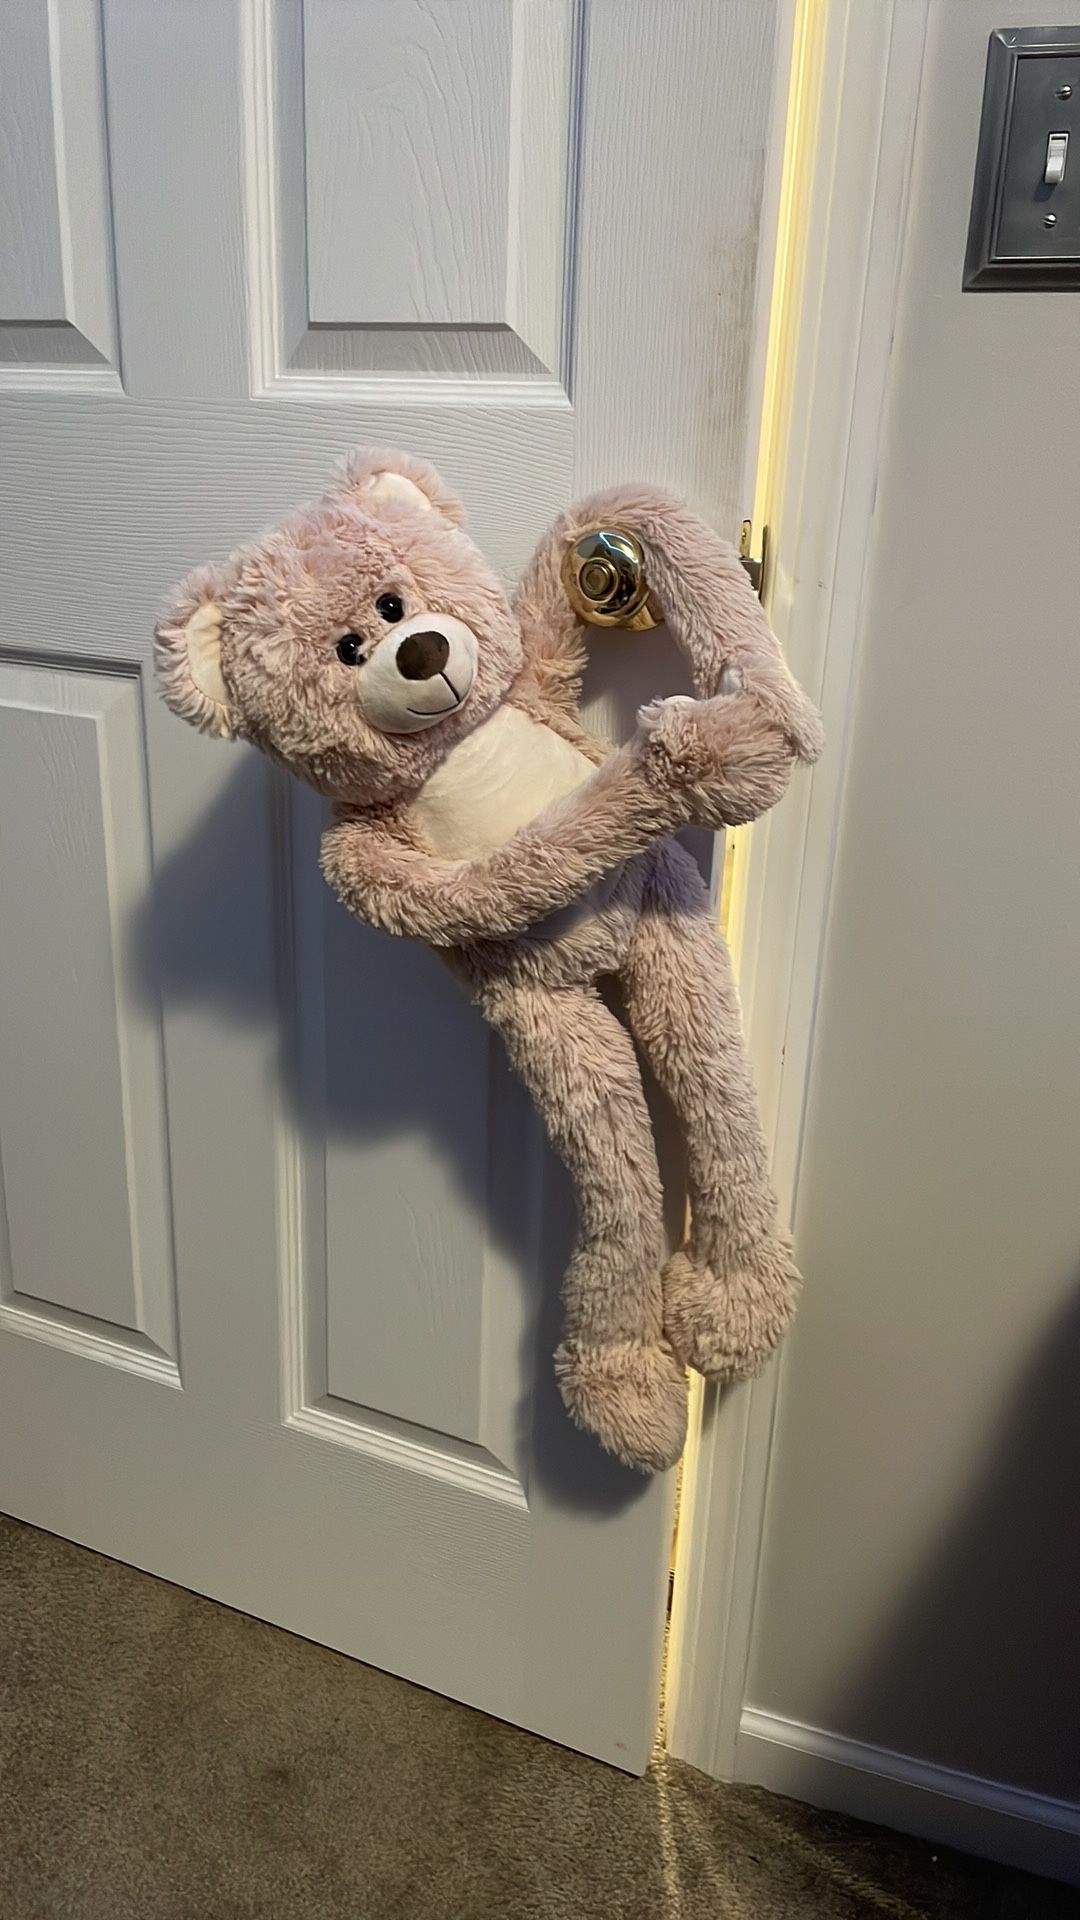 Excellent condition bear stuffed animal